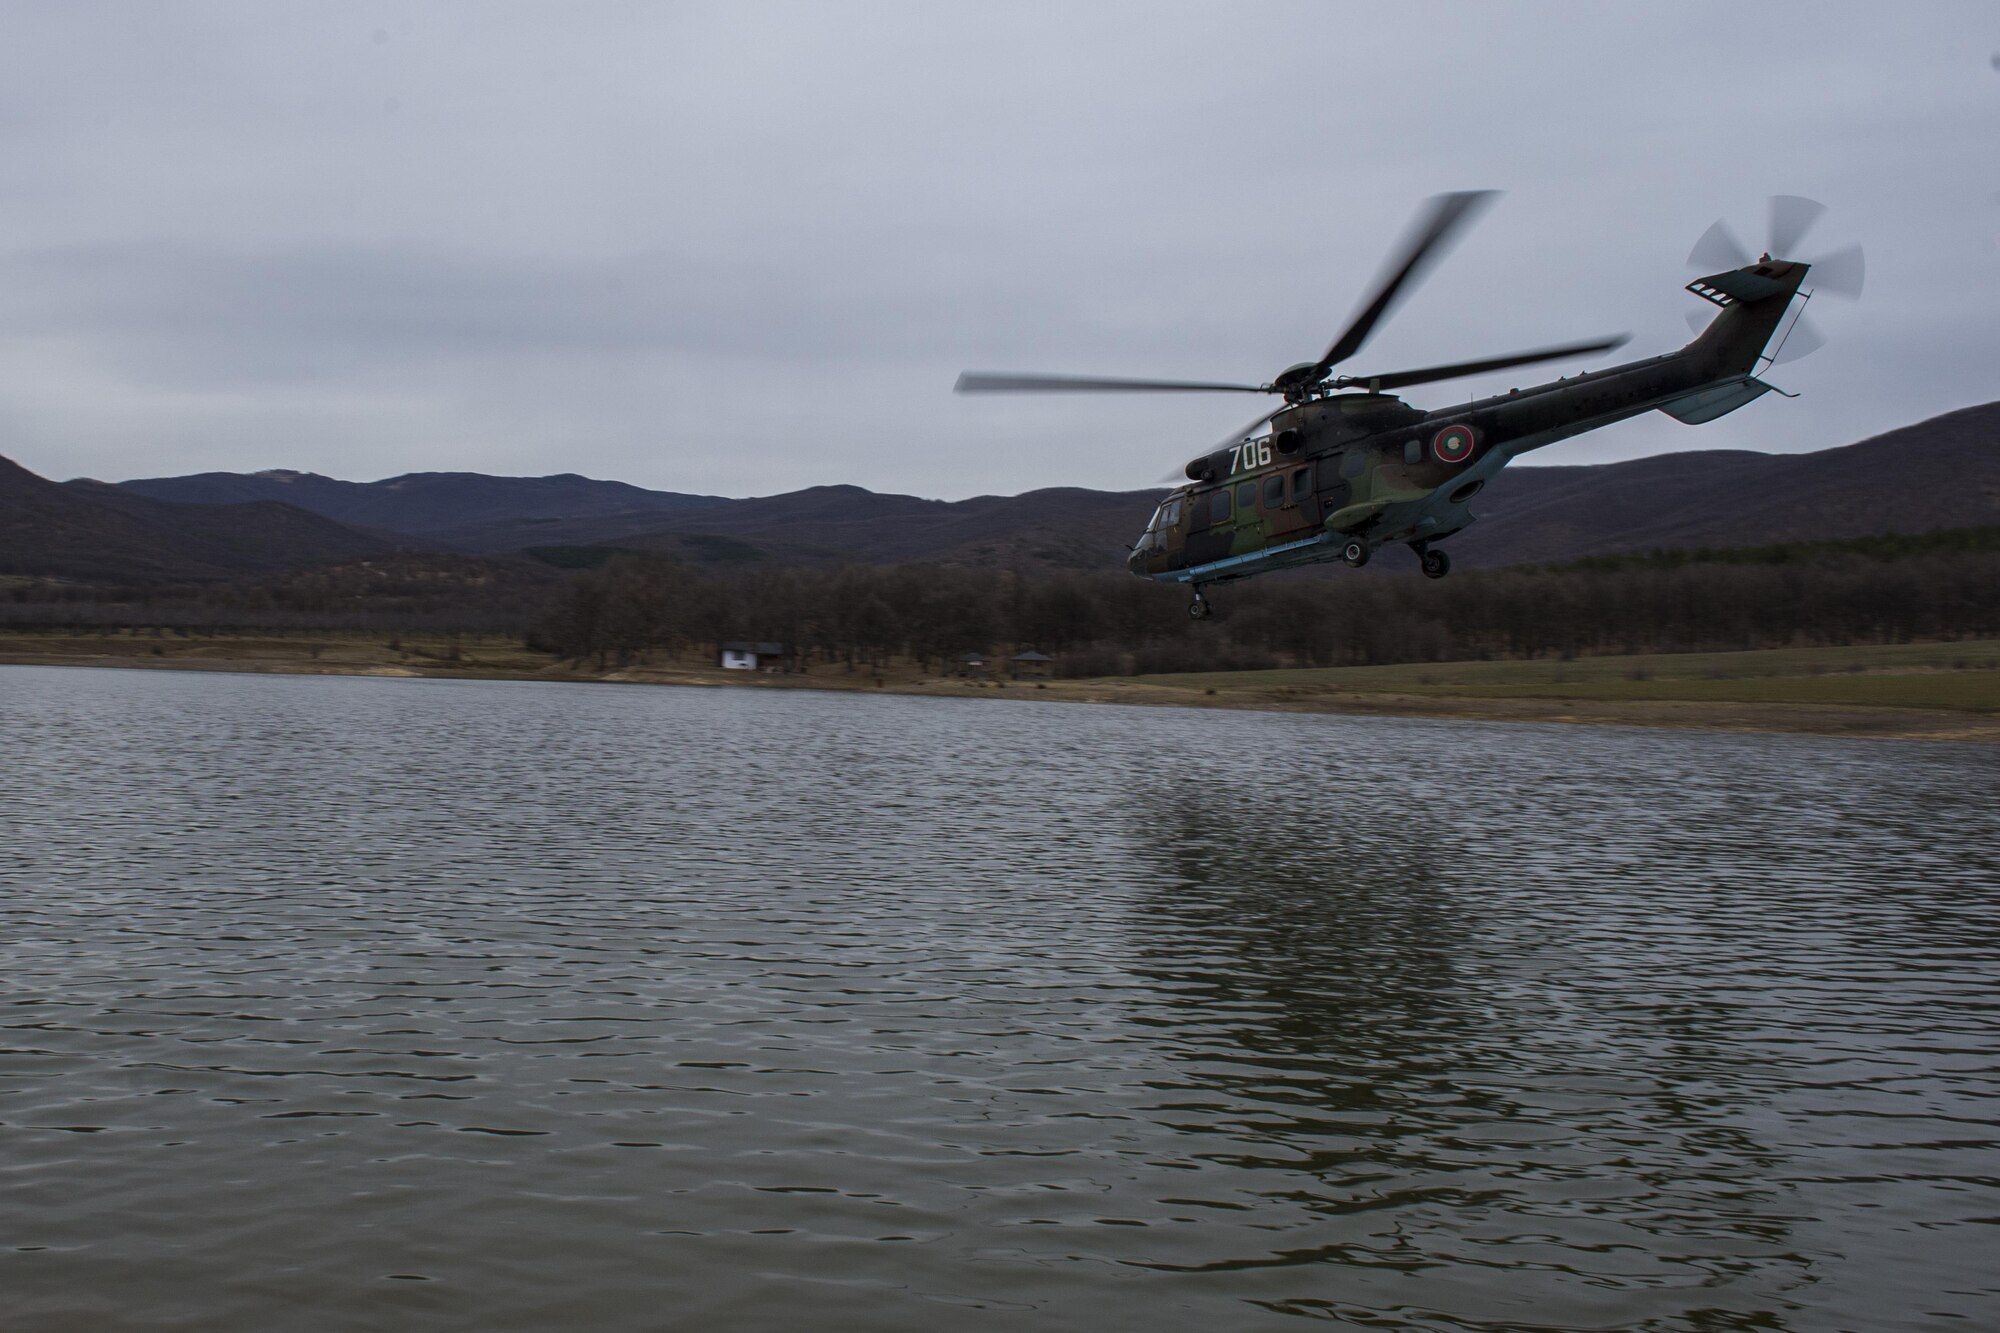 PLOVDIV, Bulgaria - A Bulgarian Cougar military helicopter flies over a body of water during combat search and rescue training near Plovdiv, Bulgaria, Feb. 11, 2016. The helicopter was protected by 74th Expeditionary Fighter Squadron A-10C Thunderbolt II aircraft during the training. (U.S. Air Force photo by Airman 1st Class Luke Kitterman/Released)